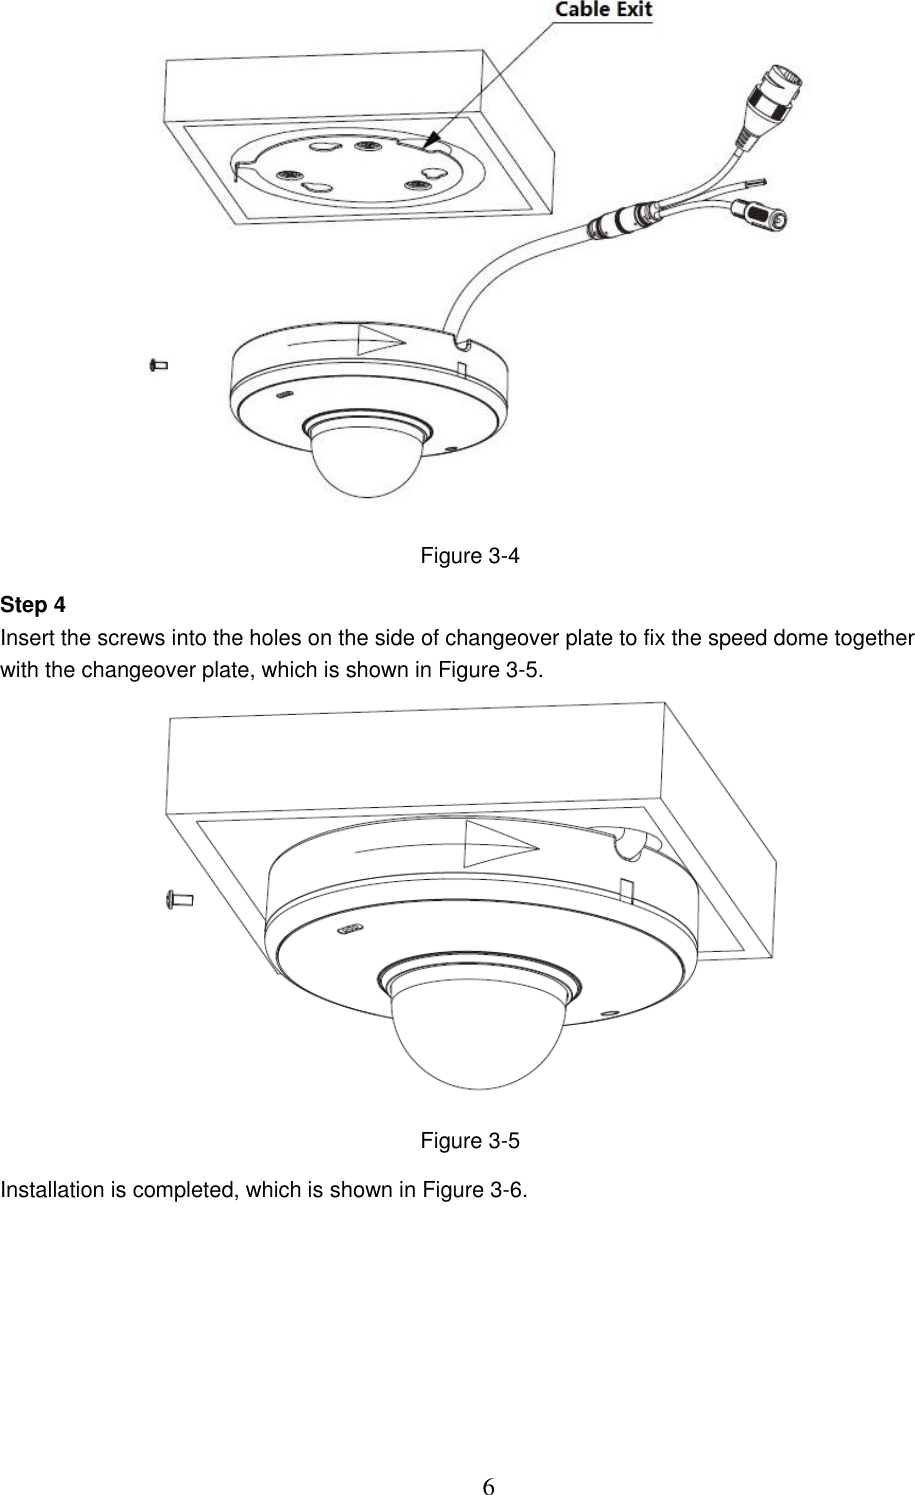  6  Figure 3-4 Step 4 Insert the screws into the holes on the side of changeover plate to fix the speed dome together with the changeover plate, which is shown in Figure 3-5.  Figure 3-5 Installation is completed, which is shown in Figure 3-6. 